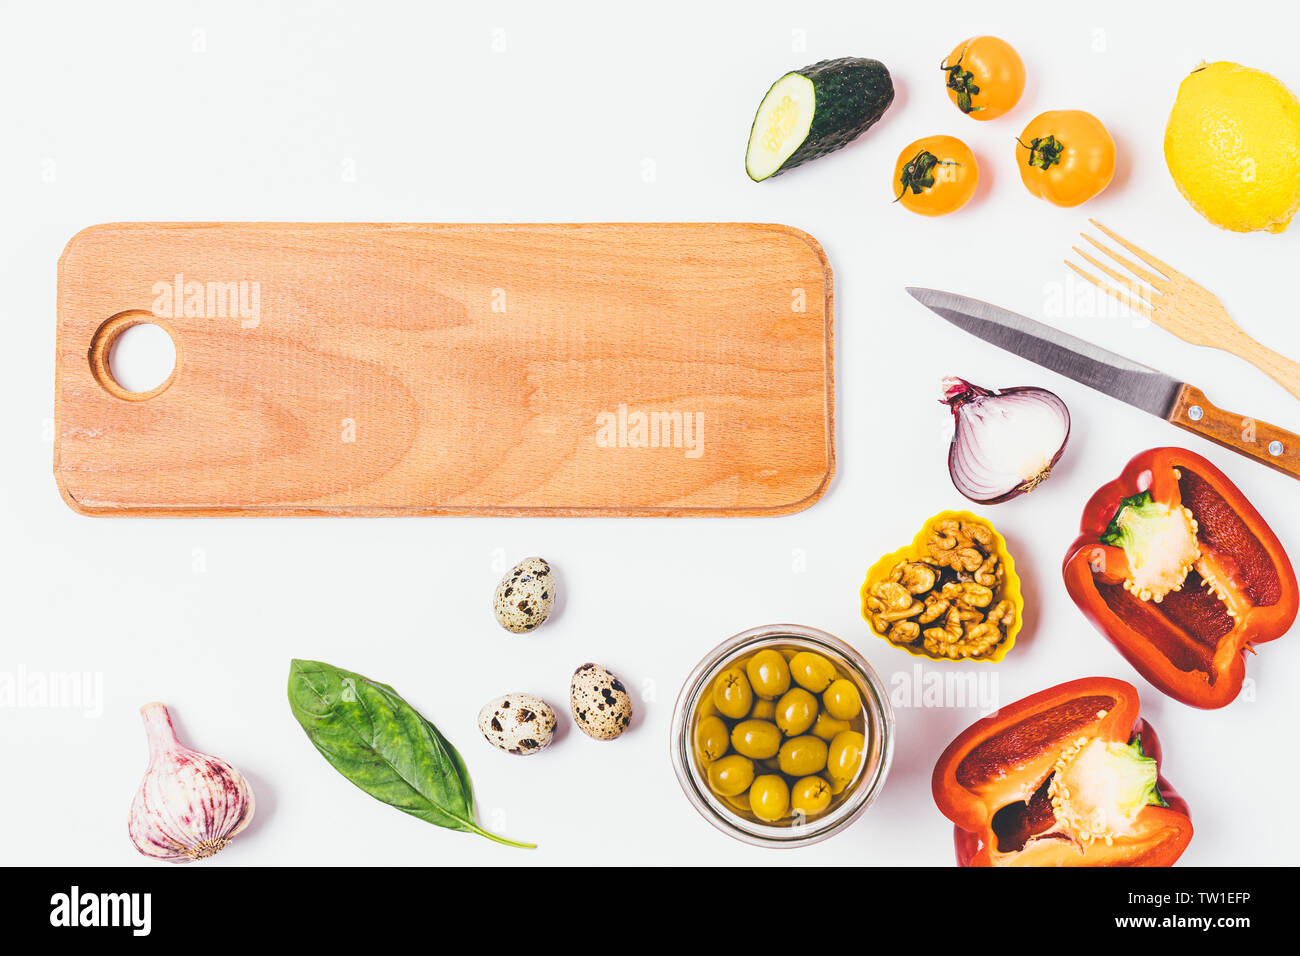 Food background of wooden board next to tomatoes, cucumbers, bell peppers, nuts, greens and quail eggs, flat lay composition on white kitchen table. Stock Photo